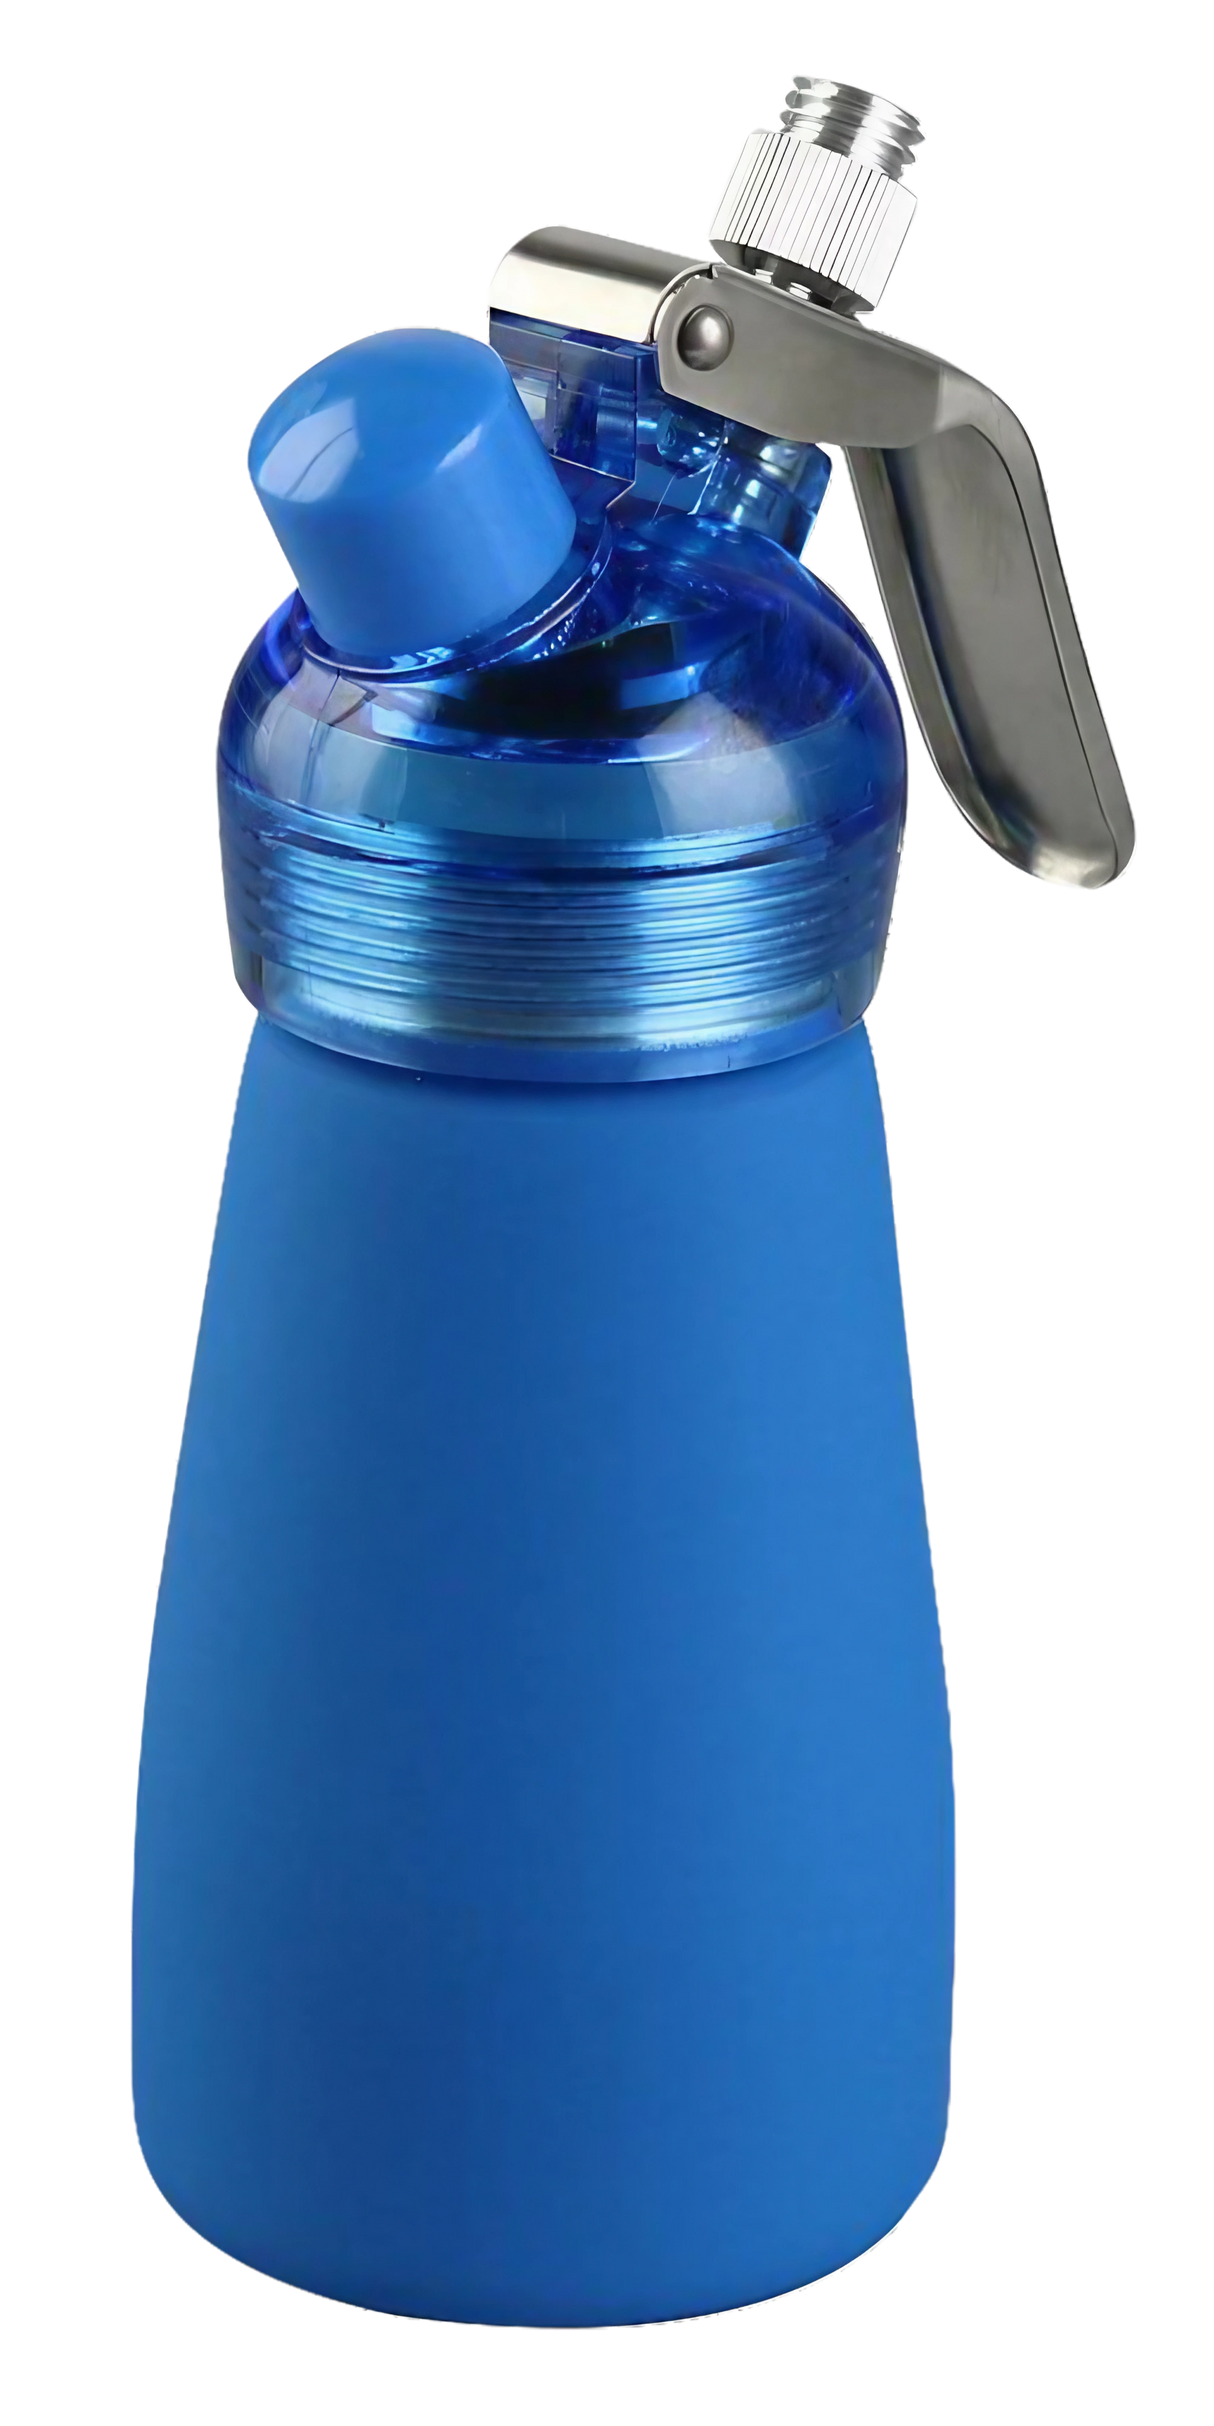 Special Blue Suede Series Cream Dispenser in blue, compact and portable with steel accents